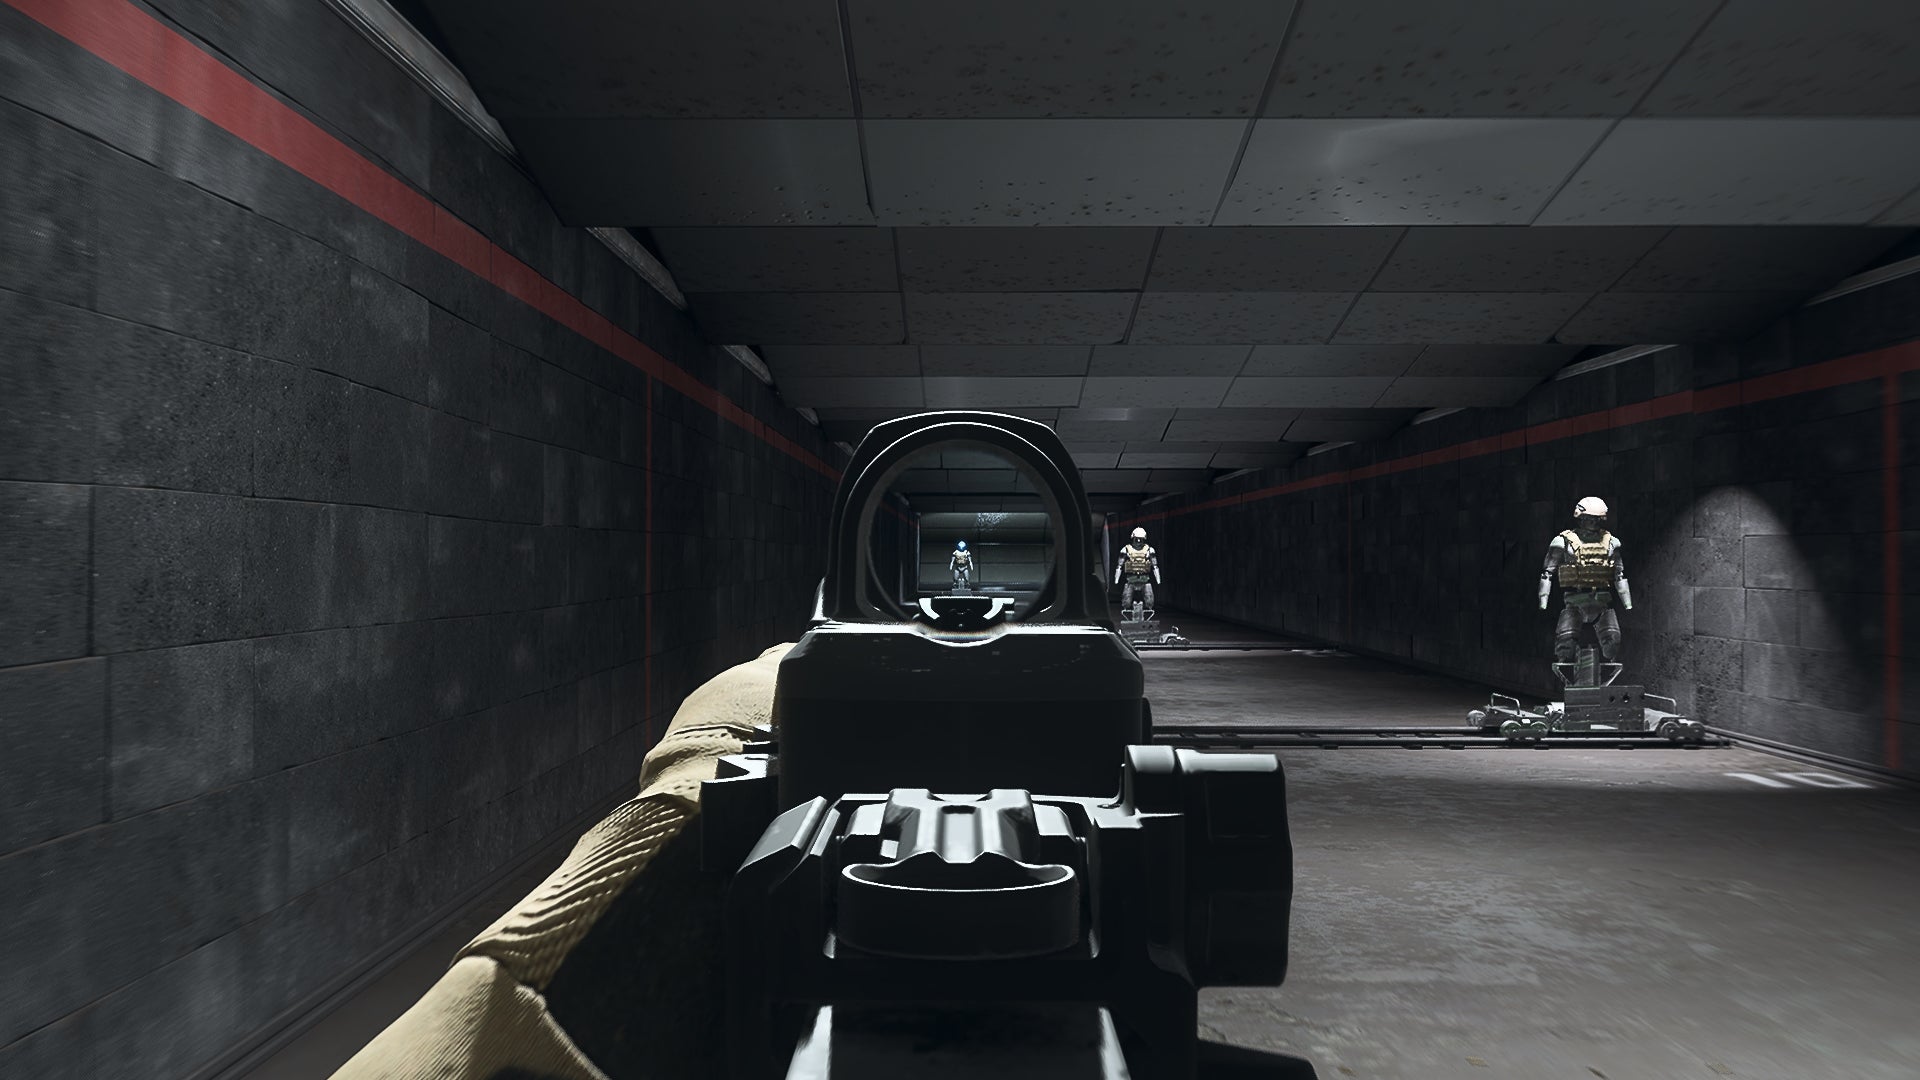 The player in Warzone 2.0 aims at a training dummy using the Corio RE-X Pro optic attachment.